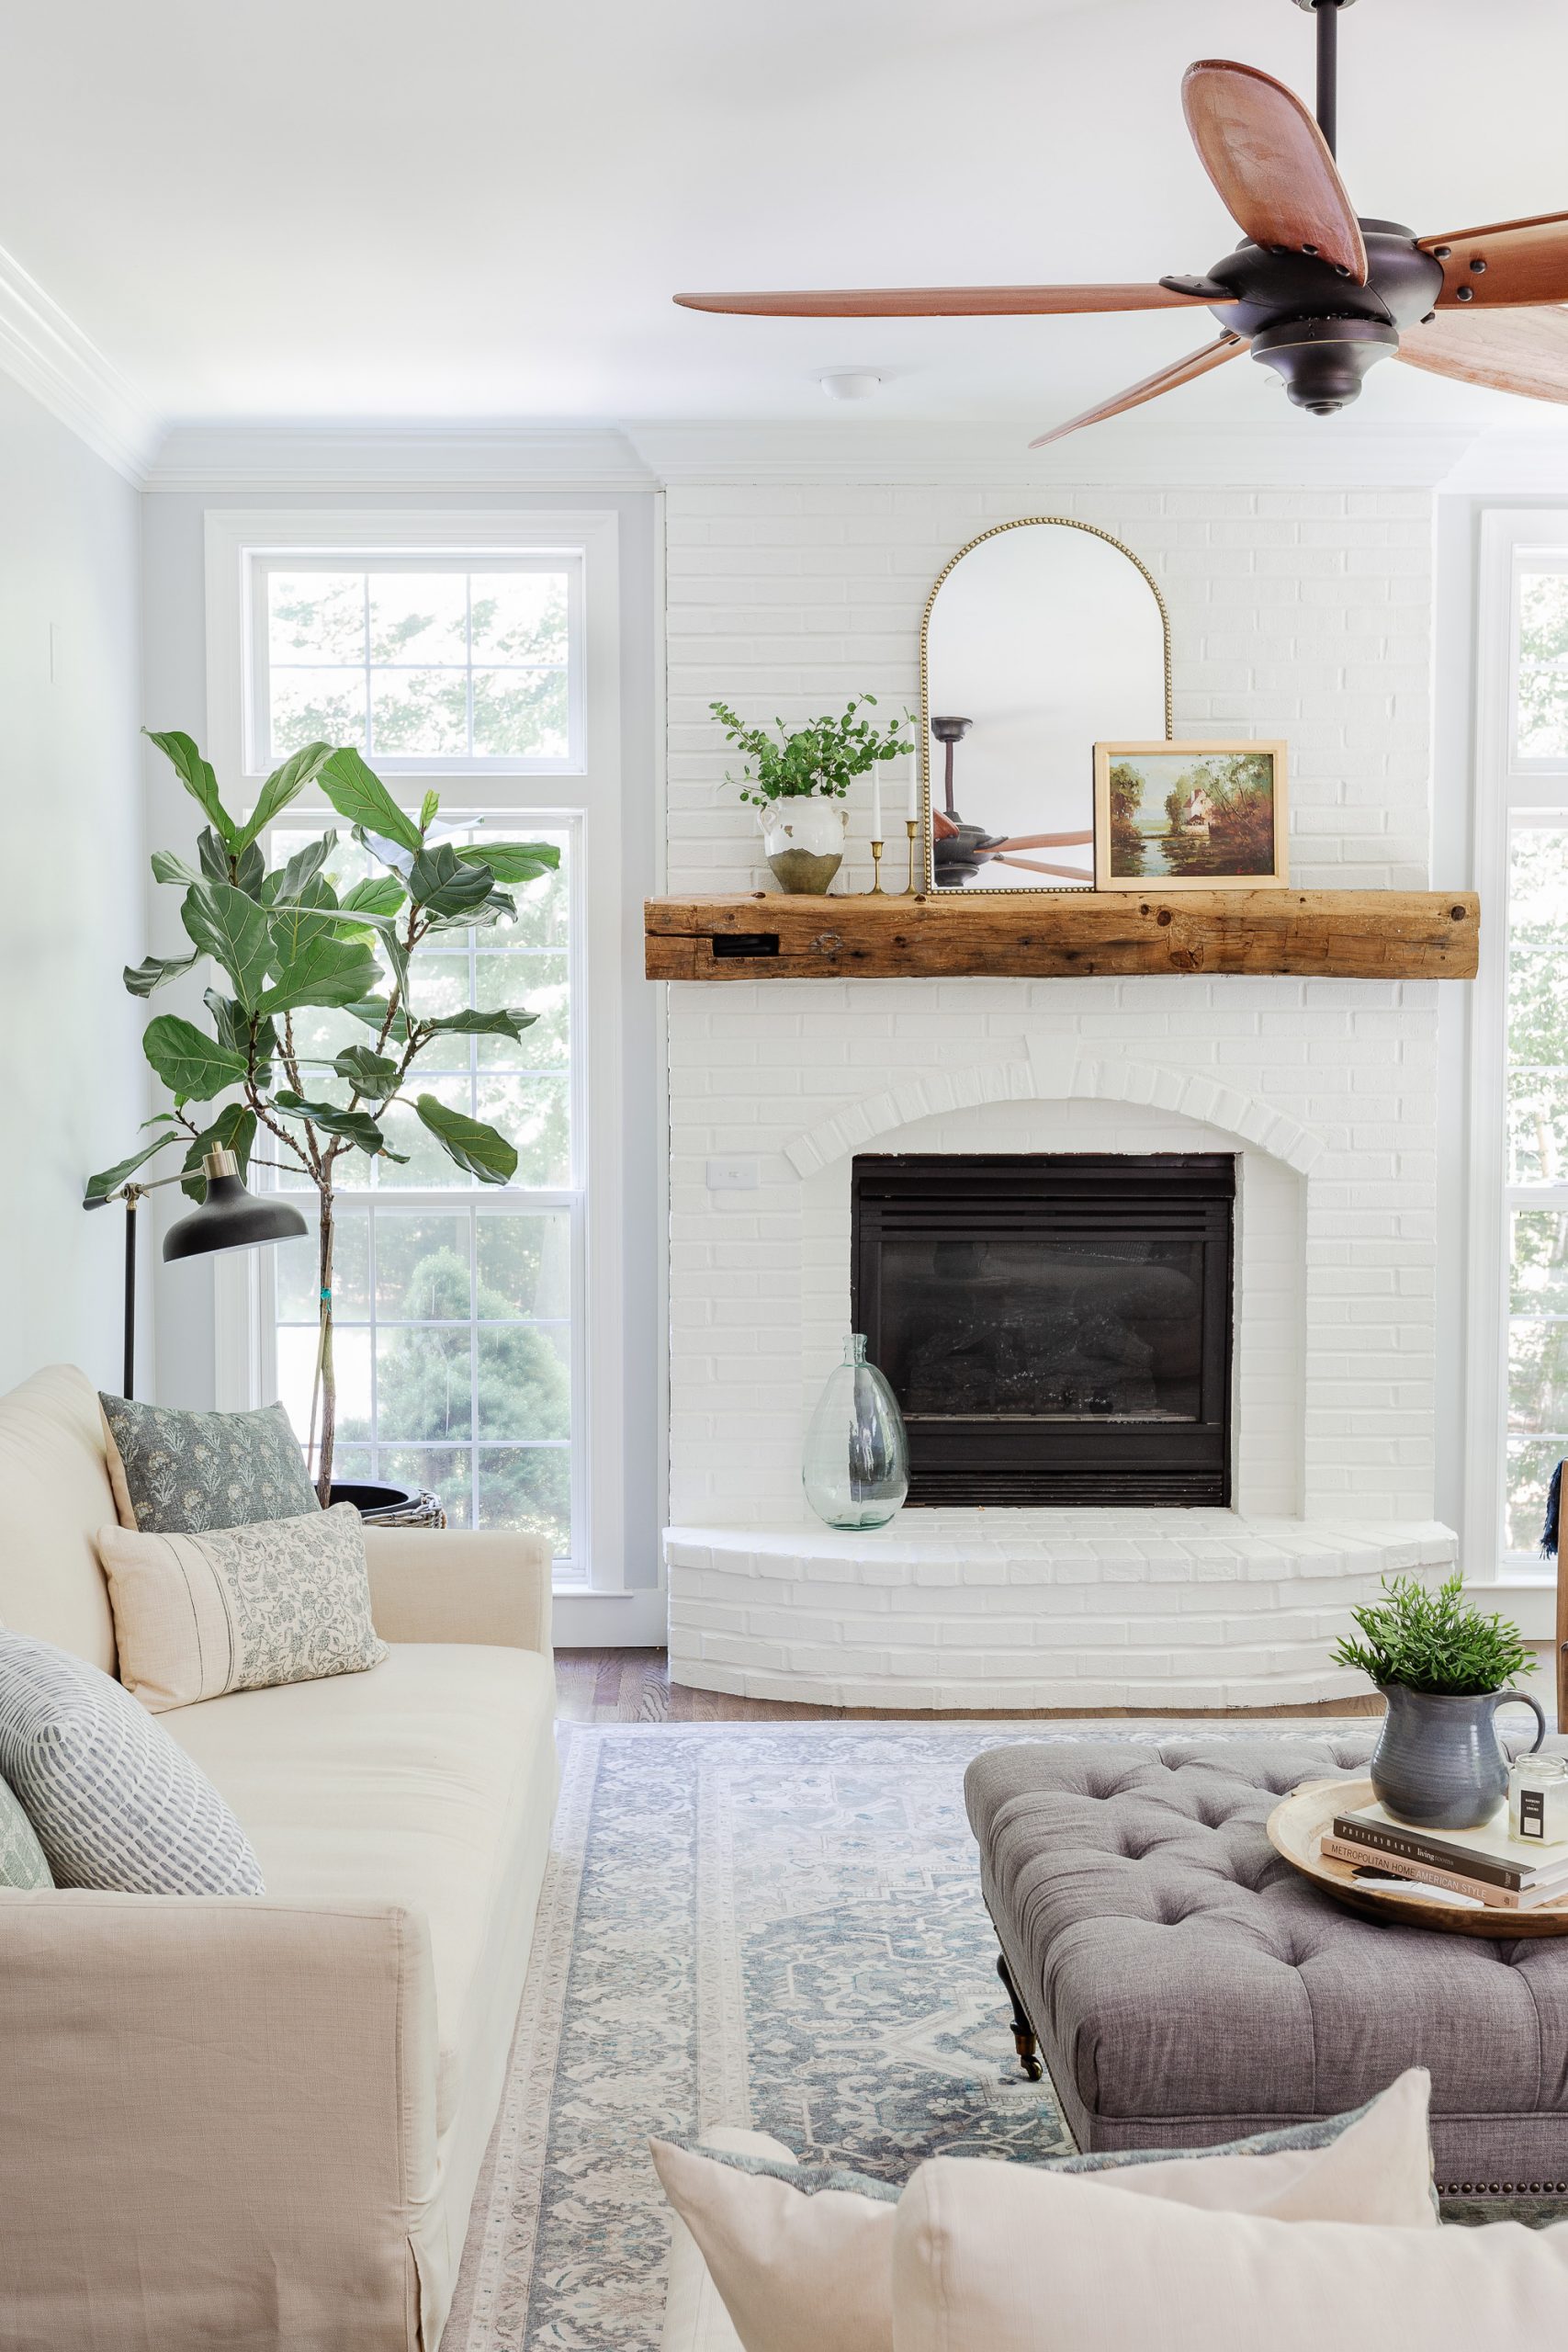 family room with white brick fireplace, sofa and fiddle leaf fig tree in the corner next to the window